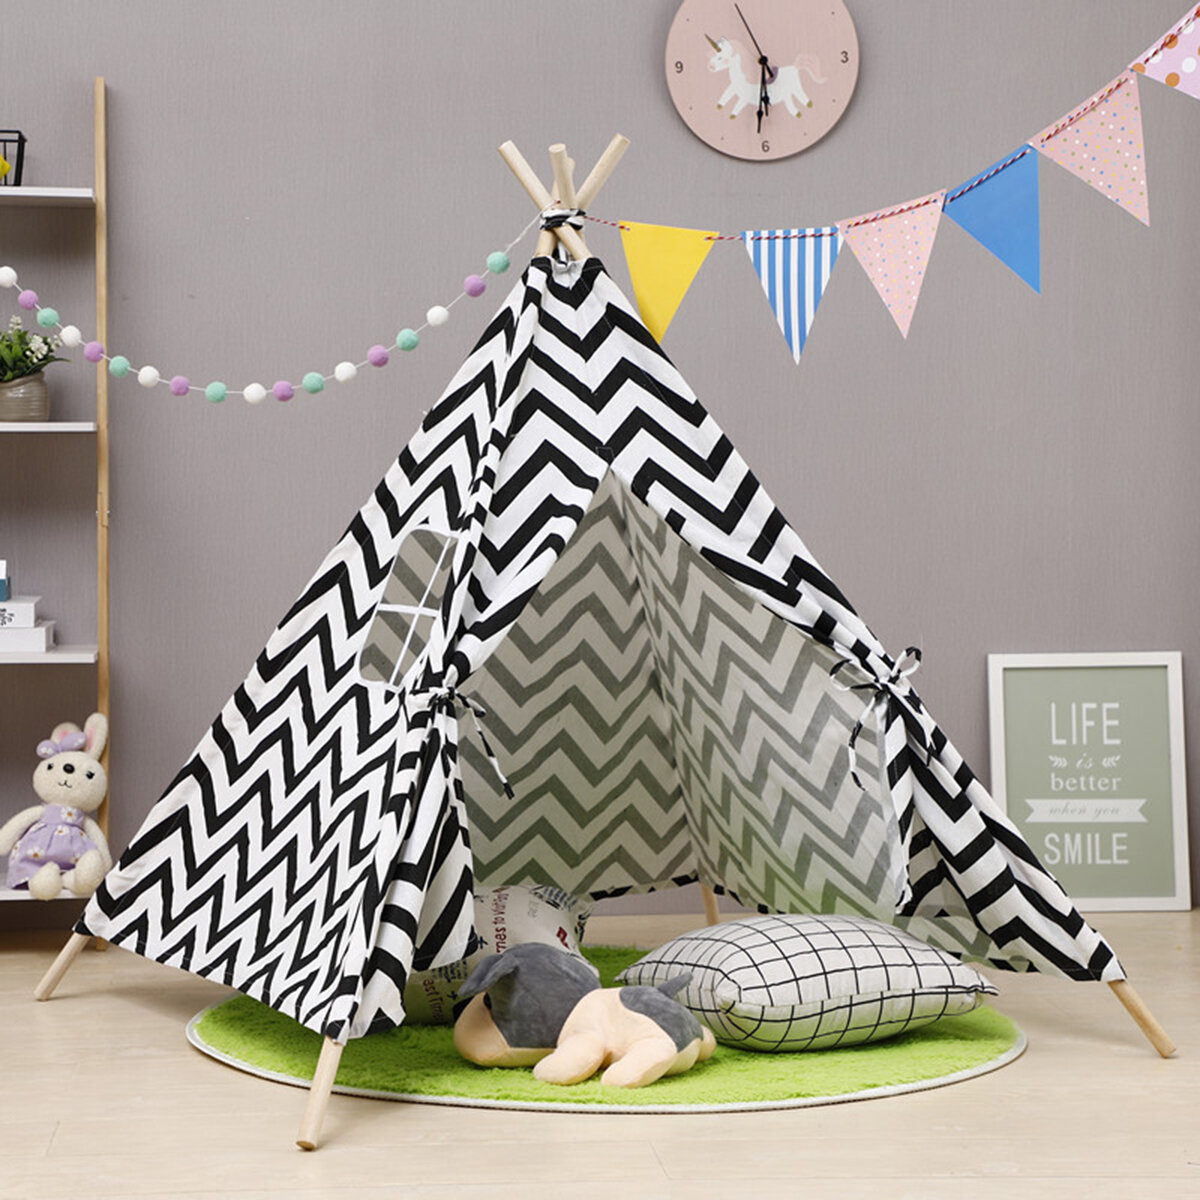 Image of 16M/18M Kids Teepee Play Tent Pretend Playhouse Indoor Outdoor Children Toddler Indian Canvas Playhouse Sleeping Dome